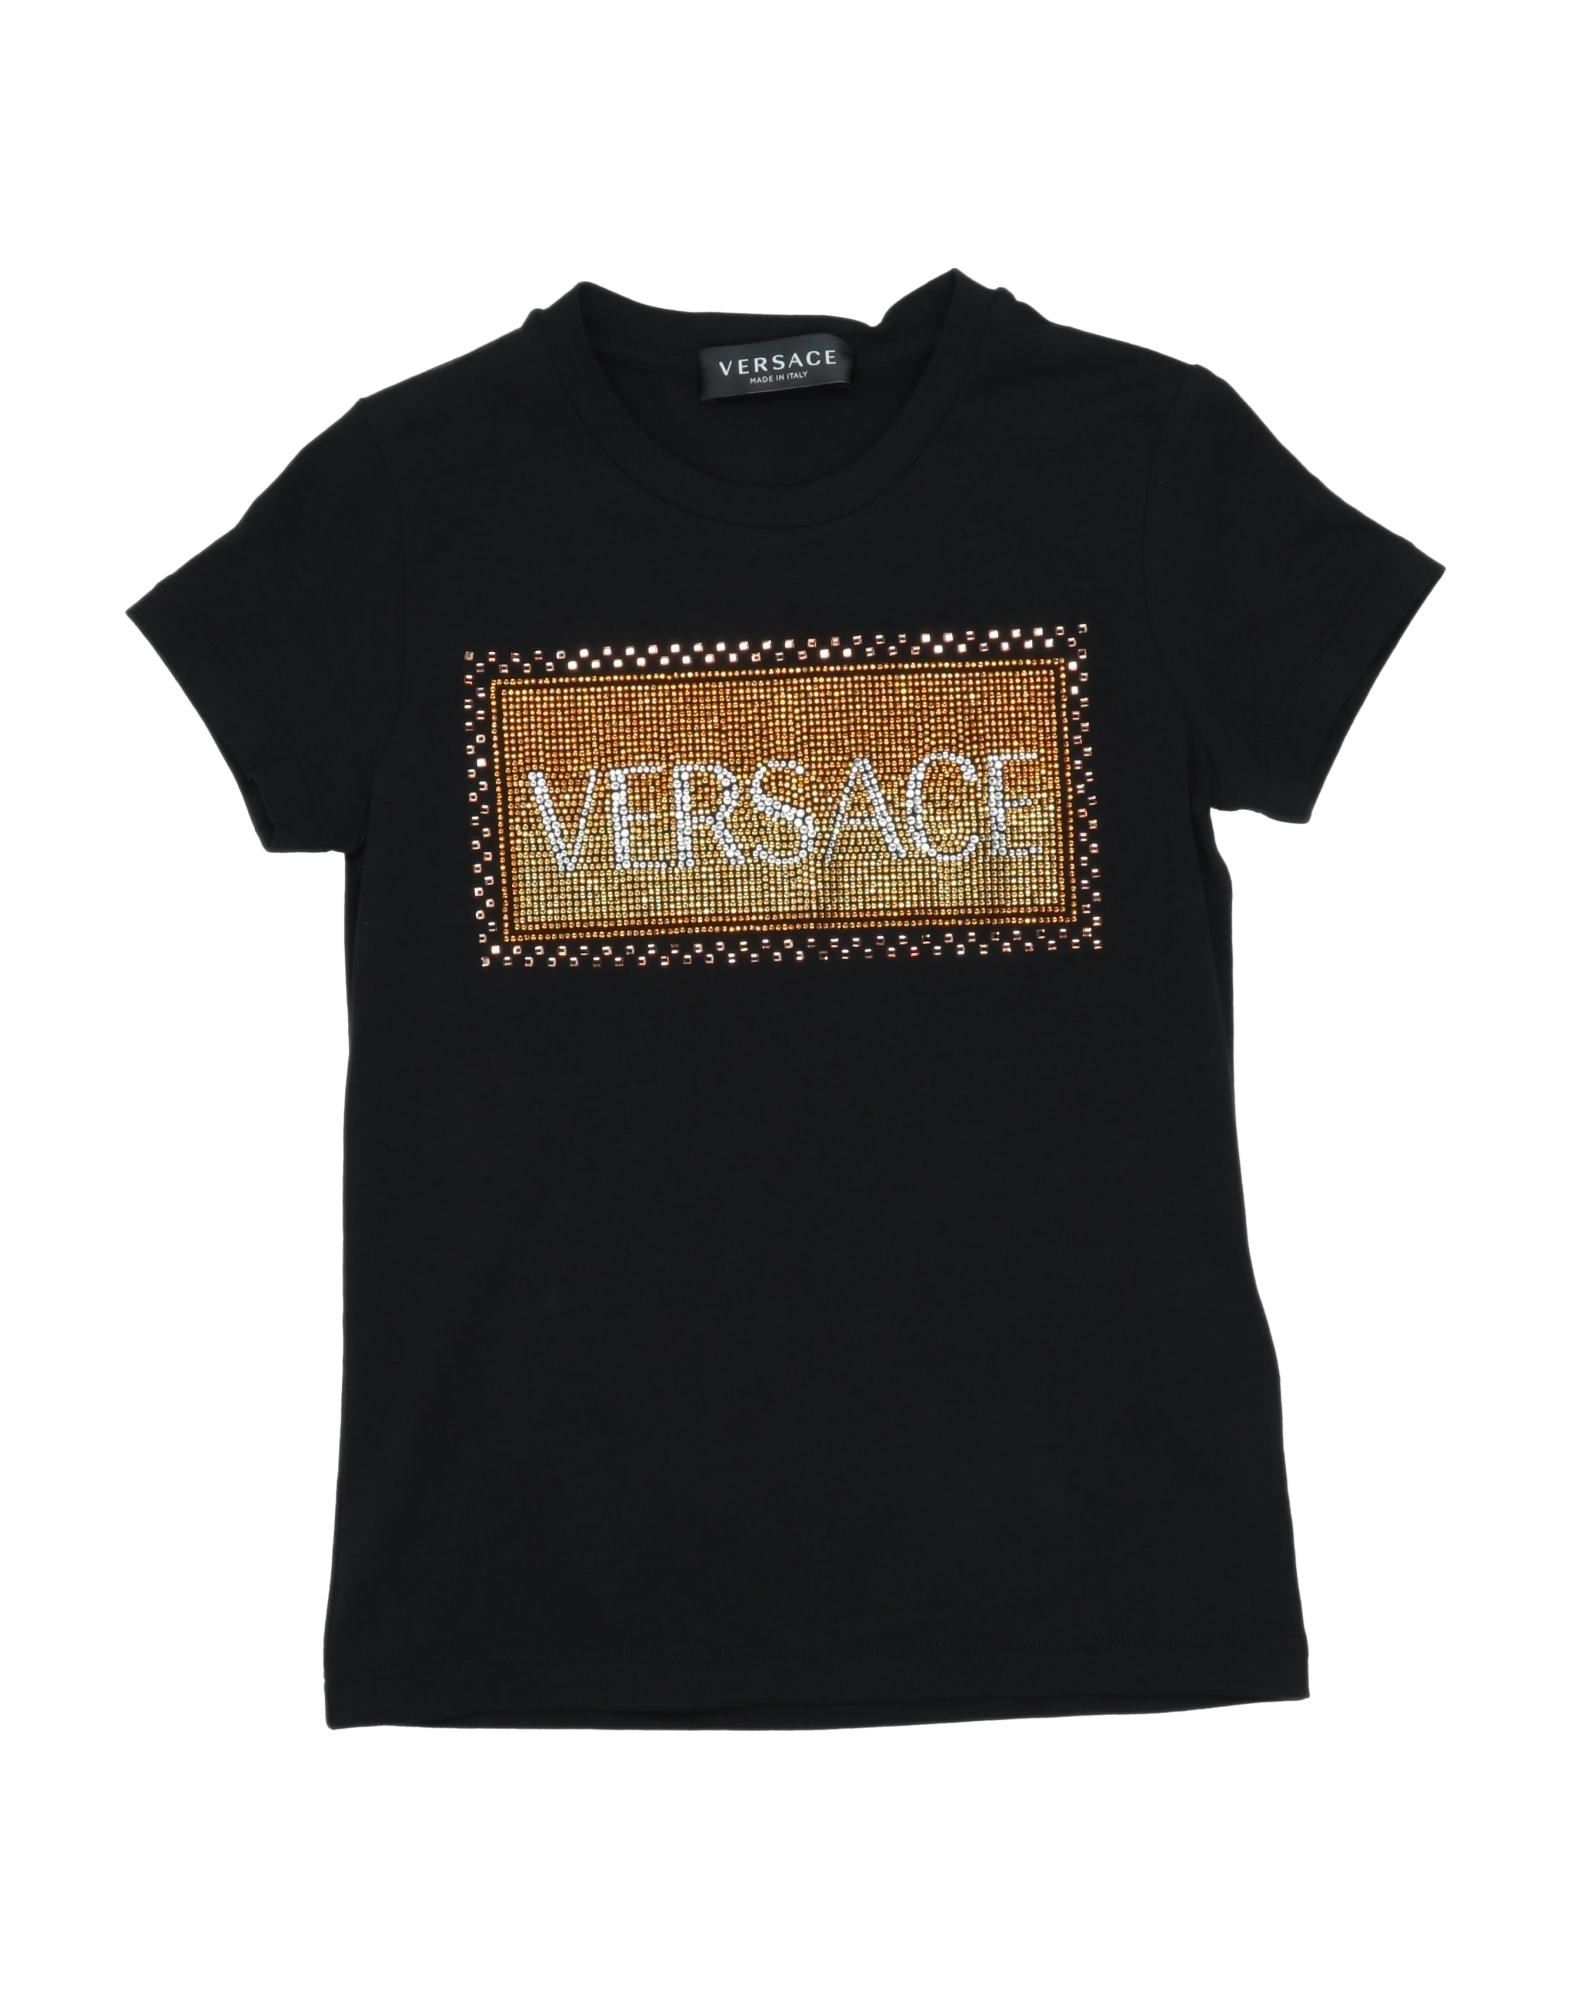 VERSACE YOUNG T-SHIRTS